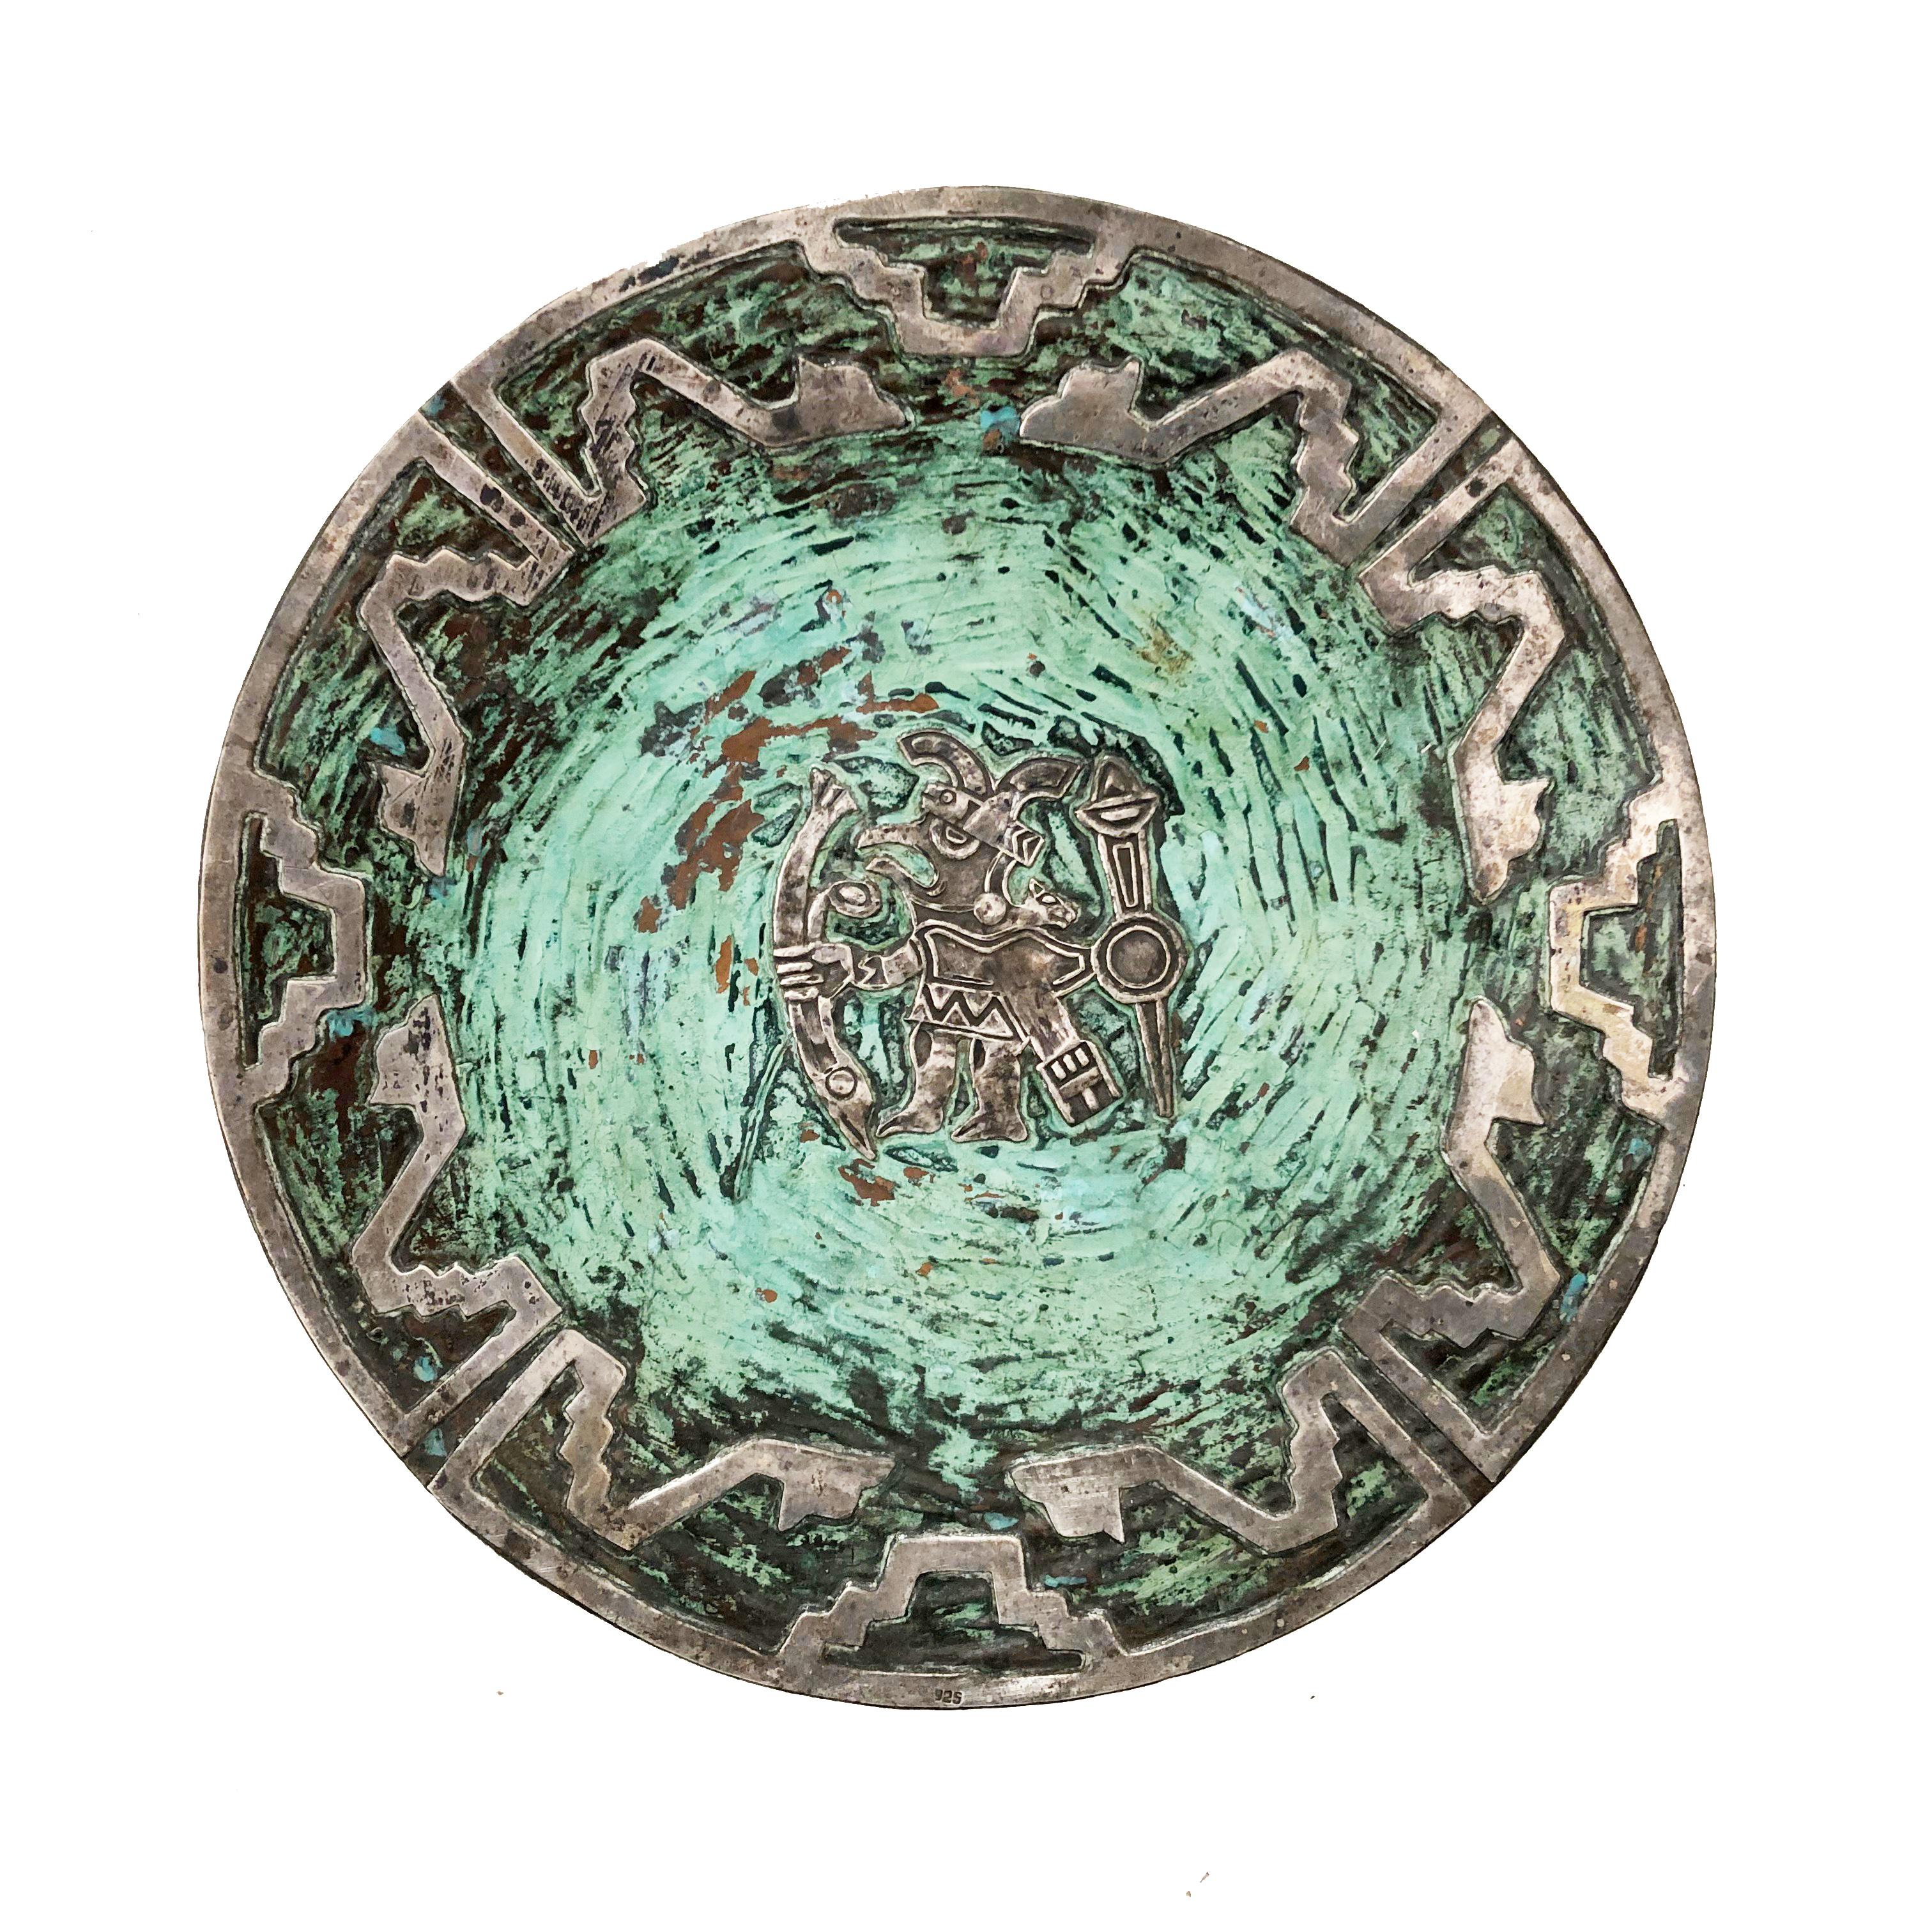 Silver and turquoise on copper plates attributed to Graziella Laffi with images of a warrior god and llama. Unsigned. Wonderful patina.